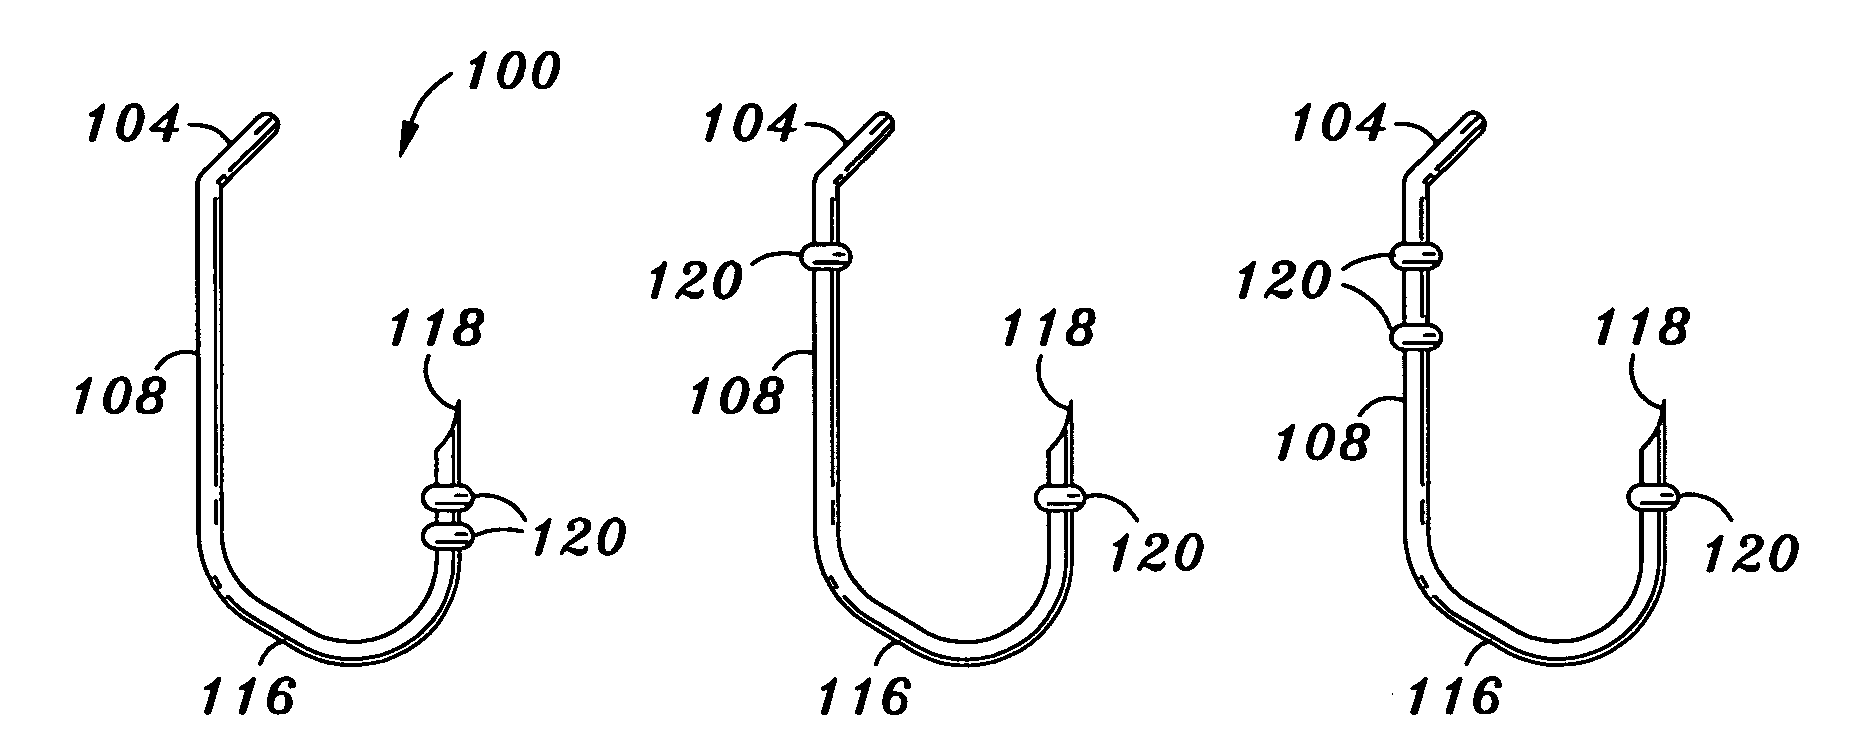 Modified fishhook for catch and release applications